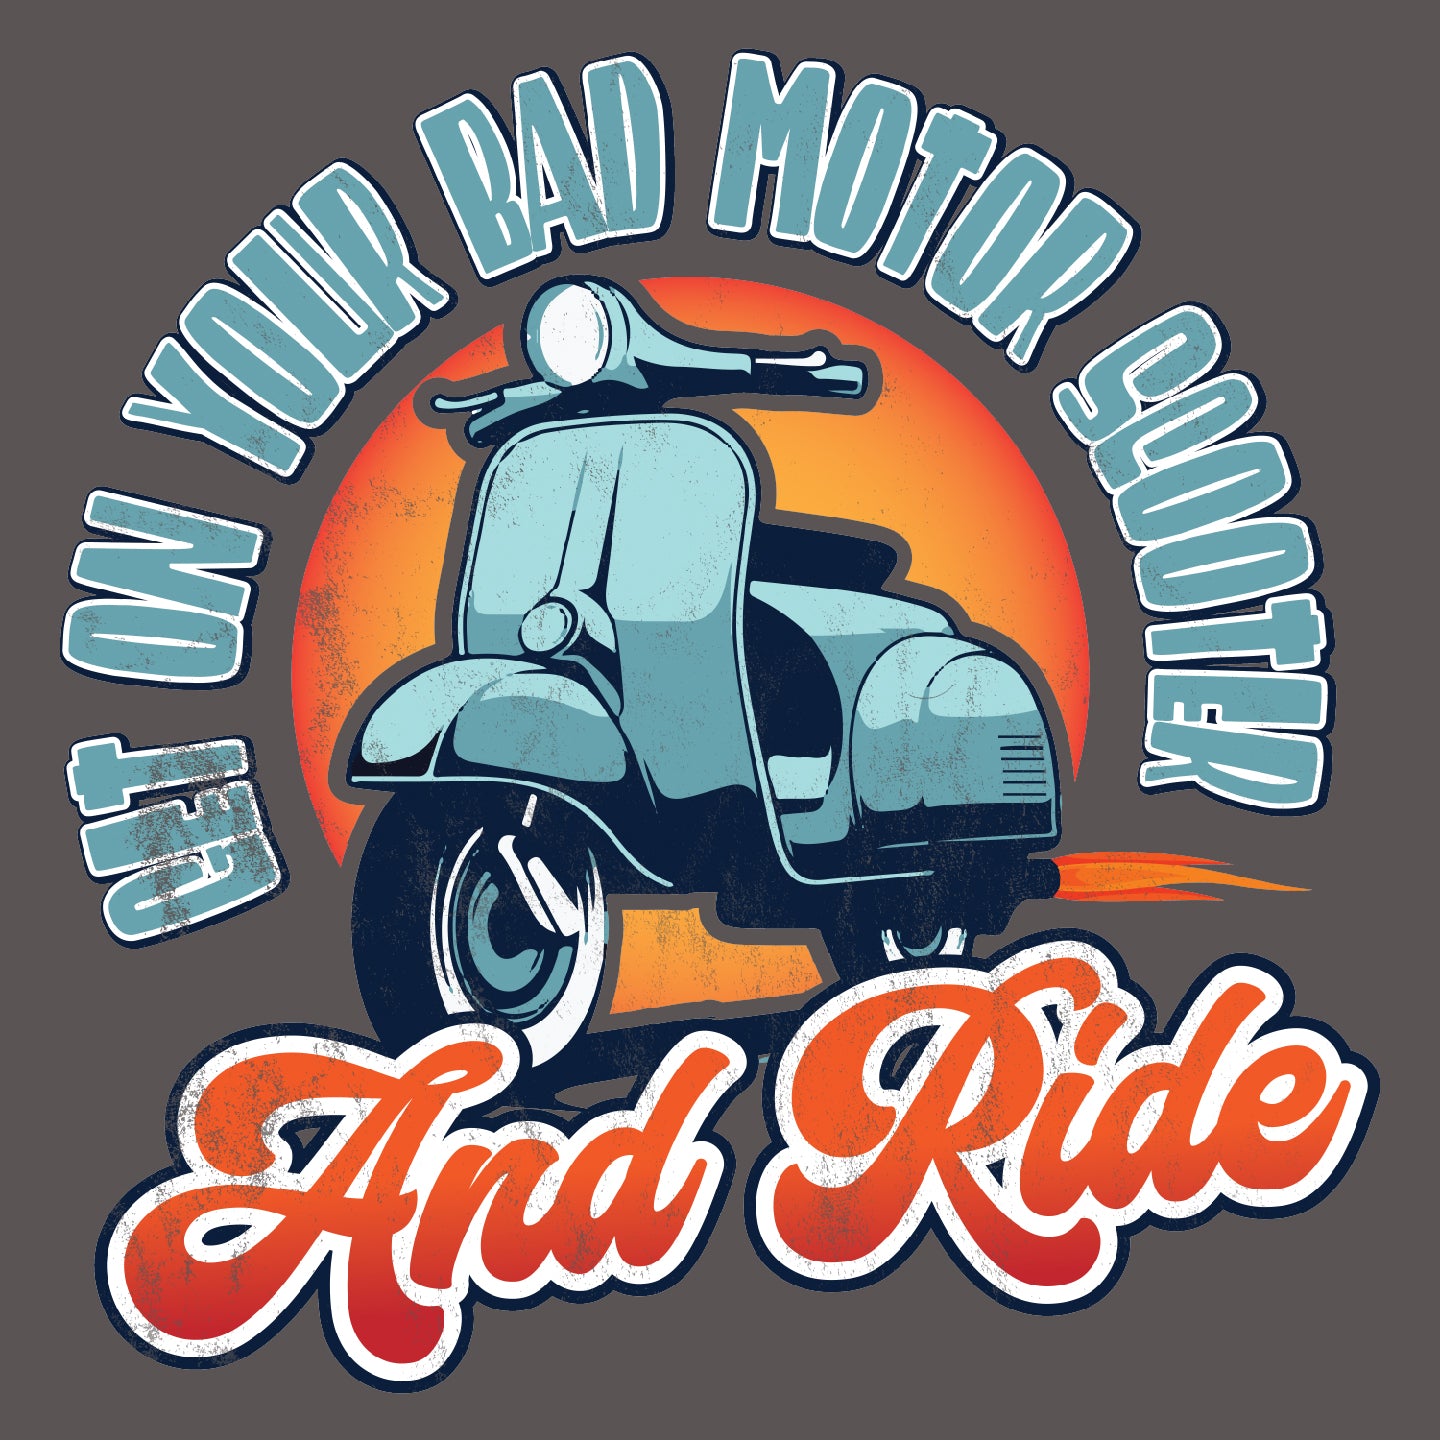 Get On Your Bad Motor Scooter. And Ride. (pre-distressed)